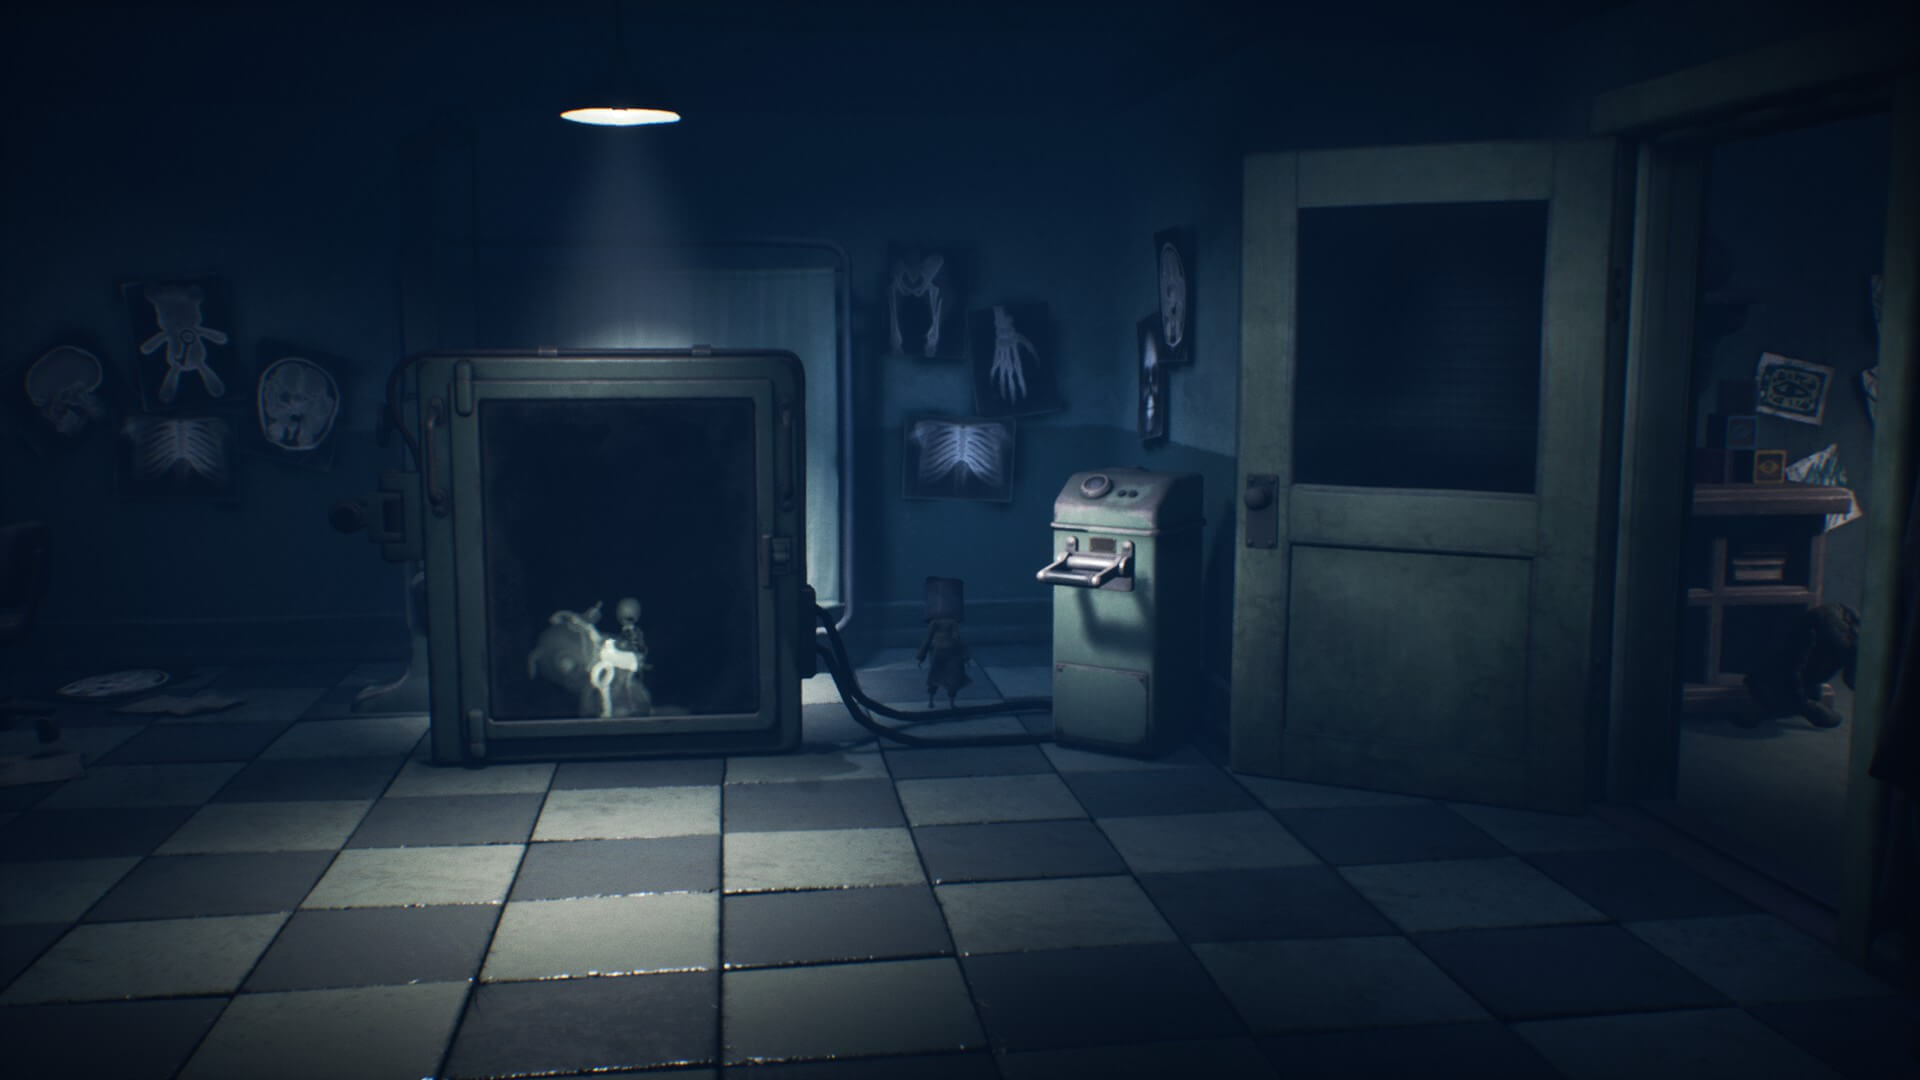 Little Nightmares 2 system requirements